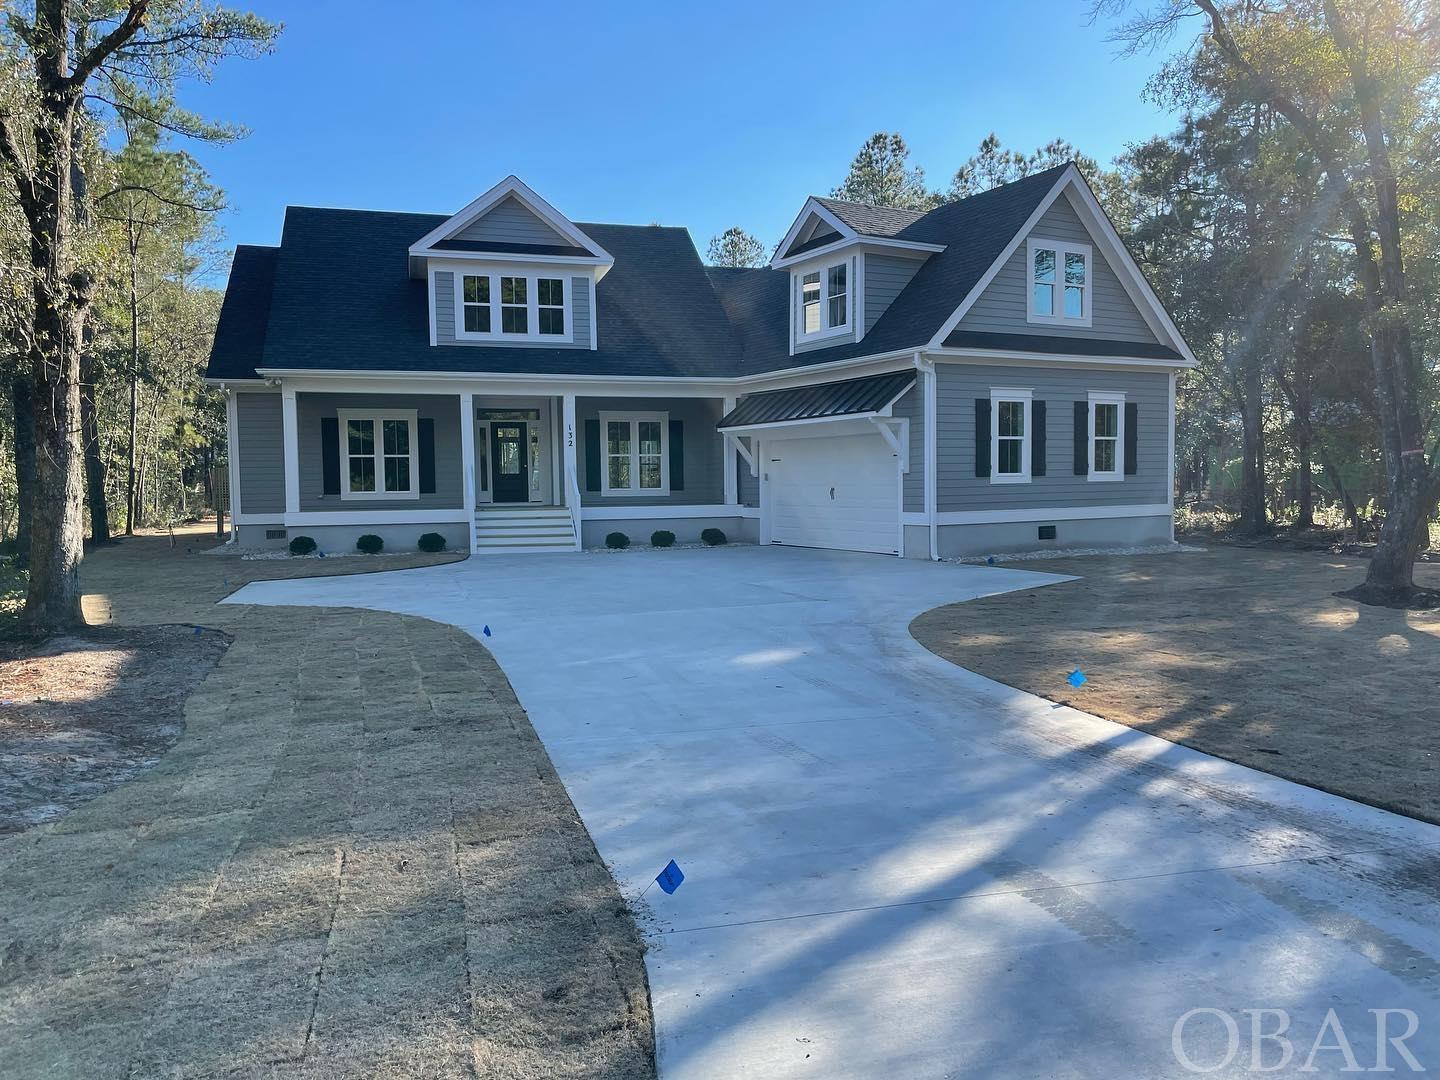 Dreamy NEW CONSTRUCTION on the North End of Manteo by BARKER & BARKER CUSTOM HOMES. The Croatan Woods neighborhood presents an opportunity to live on Roanoke Island's "North End," highly sought after for its tranquility, charm and rich history. The wooded subdivision is bordered by two wildlife preserves and offers a community nature trail leading to a soundside gazebo, sandy beach access, and a brand new pier. Take the dogs for a stroll to the sound, collect some driftwood, and head back to the house to enjoy the modern comforts of this design conscious home. Enter through the spacious two car garage, hang your bags at the custom drop zone and retreat to your groundfloor Master Suite. The luxe ensuite Bath showcases a custom tile shower, dual vanities, and upgraded tile floors, leading to a walk-in closet with built-in shelving. Two additional bedrooms on the main floor are accompanied by a convenient Jack and Jill Bath with two private vanities and tile floors. A sprawling room on the second level above the garage features a full bath and closet and can be enjoyed as a permitted fourth bedroom OR bonus room/office. The ultra modern kitchen boasts solid wood cabinetry, quartz countertops, tile backsplash, and GE stainless steel appliances. Between a large kitchen island, a breakfast nook, and a formal dining room, there are ample dining options for family and friends while the open concept layout and powder room make the space perfect for entertaining. The great room affords both comfort and elegance, outfitted with 9ft coffered ceilings, crown molding, wood beam accents, a gas fireplace, and hardwood floors throughout. Move the party outdoors to the screened in porch or patio to enjoy a famous Outer Banks sunset or the sounds of nature. The stylish details of the home's exterior leave nothing to be desired when it comes to curb appeal. You'll find fresh sod, a fully landscaped yard with an irrigation system, a covered porch, board and batten shutters, and durable LP Smart Siding. There is also room for a pool. While the home comprises top of the line finishes throughout, an early contract affords the buyer some creative control with an opportunity to upgrade and customize. Construction is in progress and estimated to be completed in December 2021. Don't delay folks, THIS IS THE ONE!